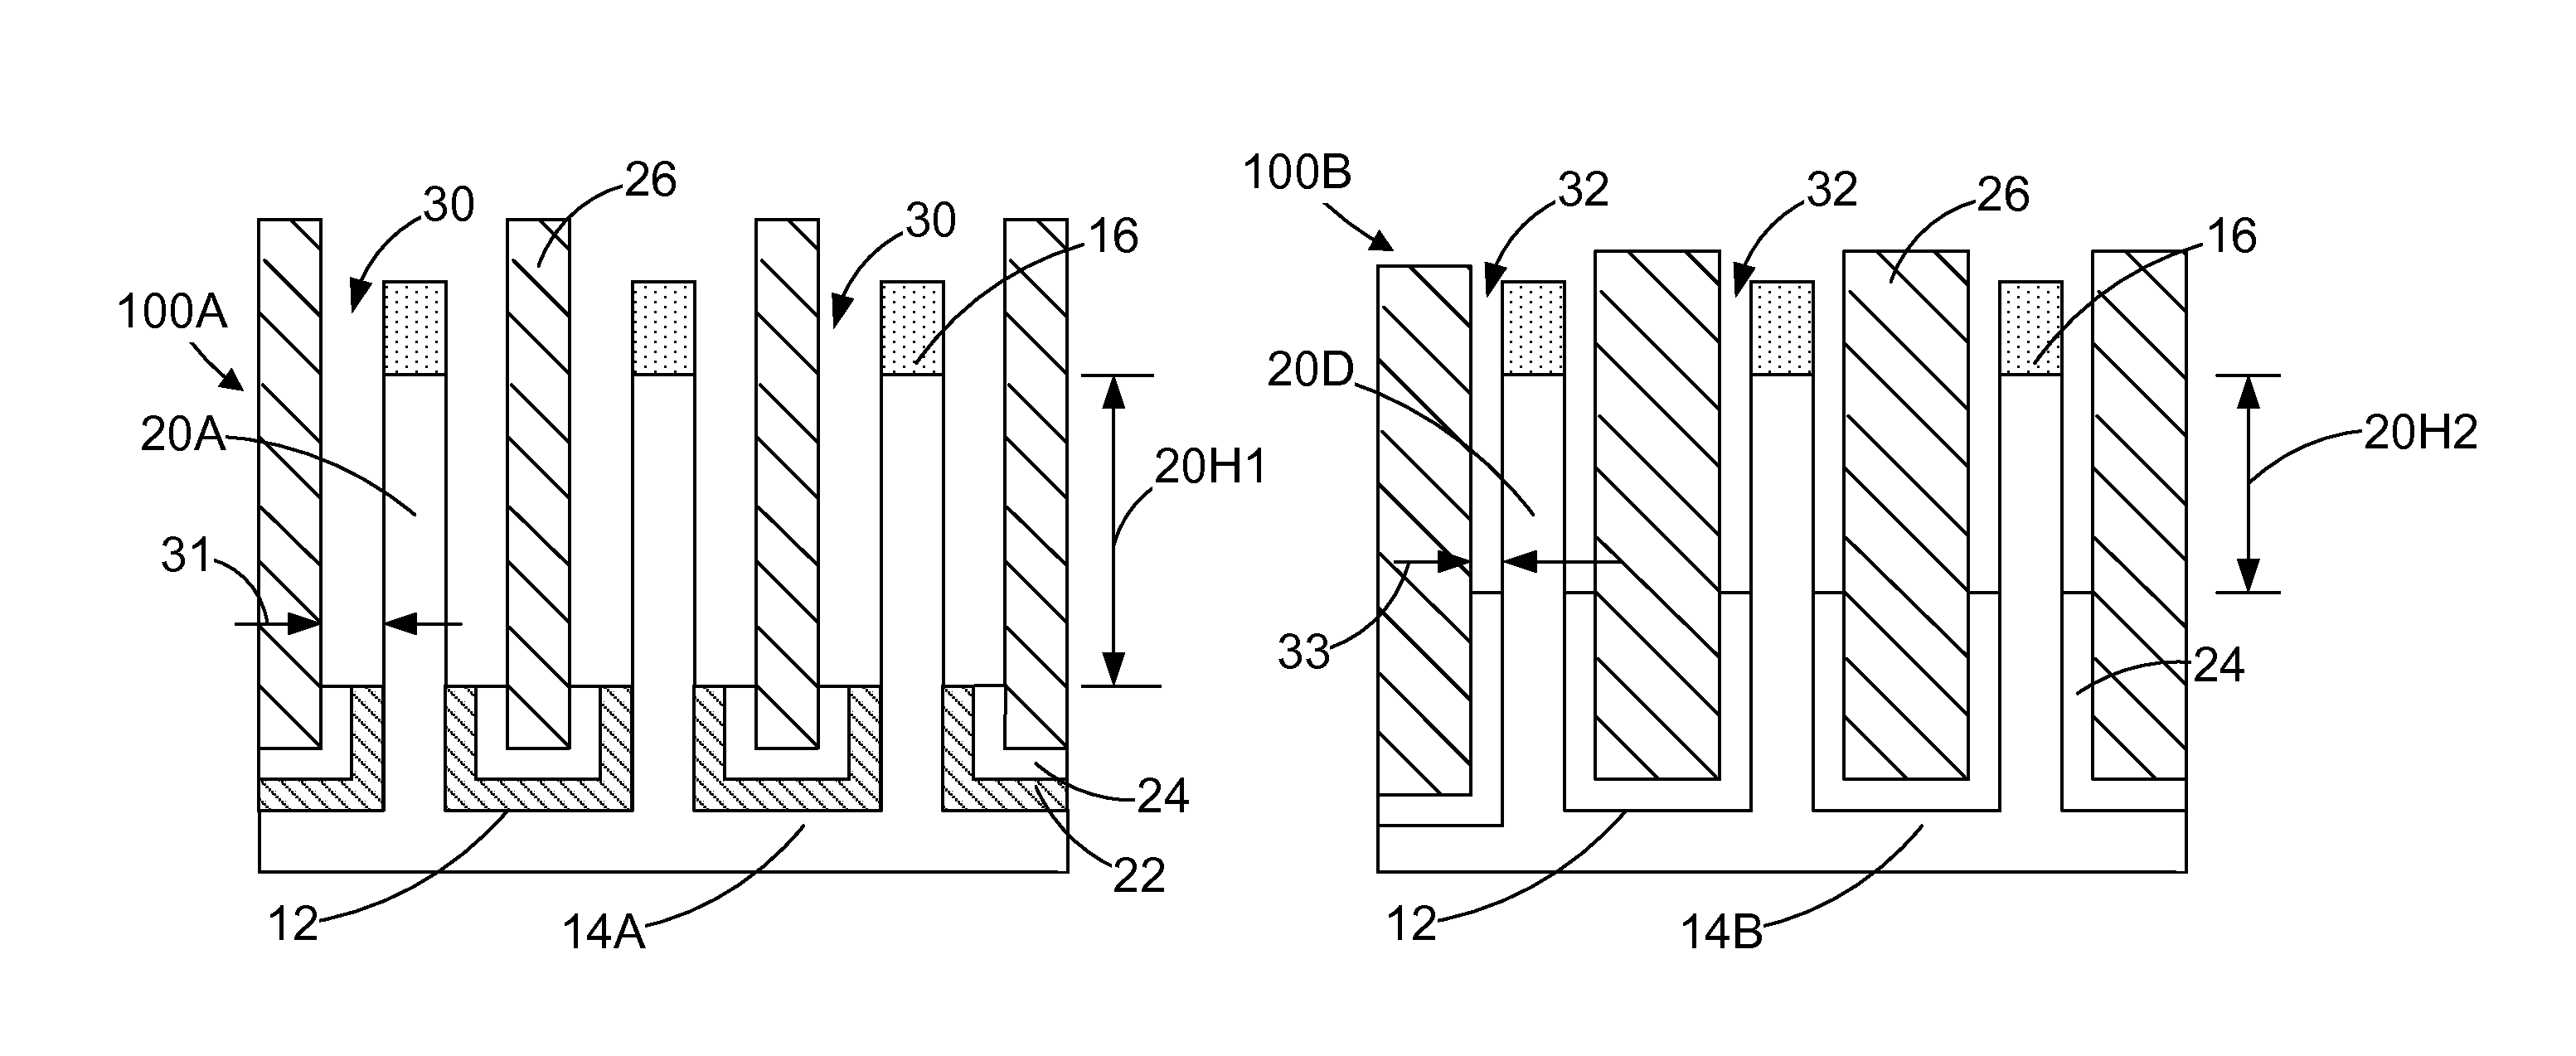 Methods of forming different finfet devices having different fin heights and an integrated circuit product containing such devices